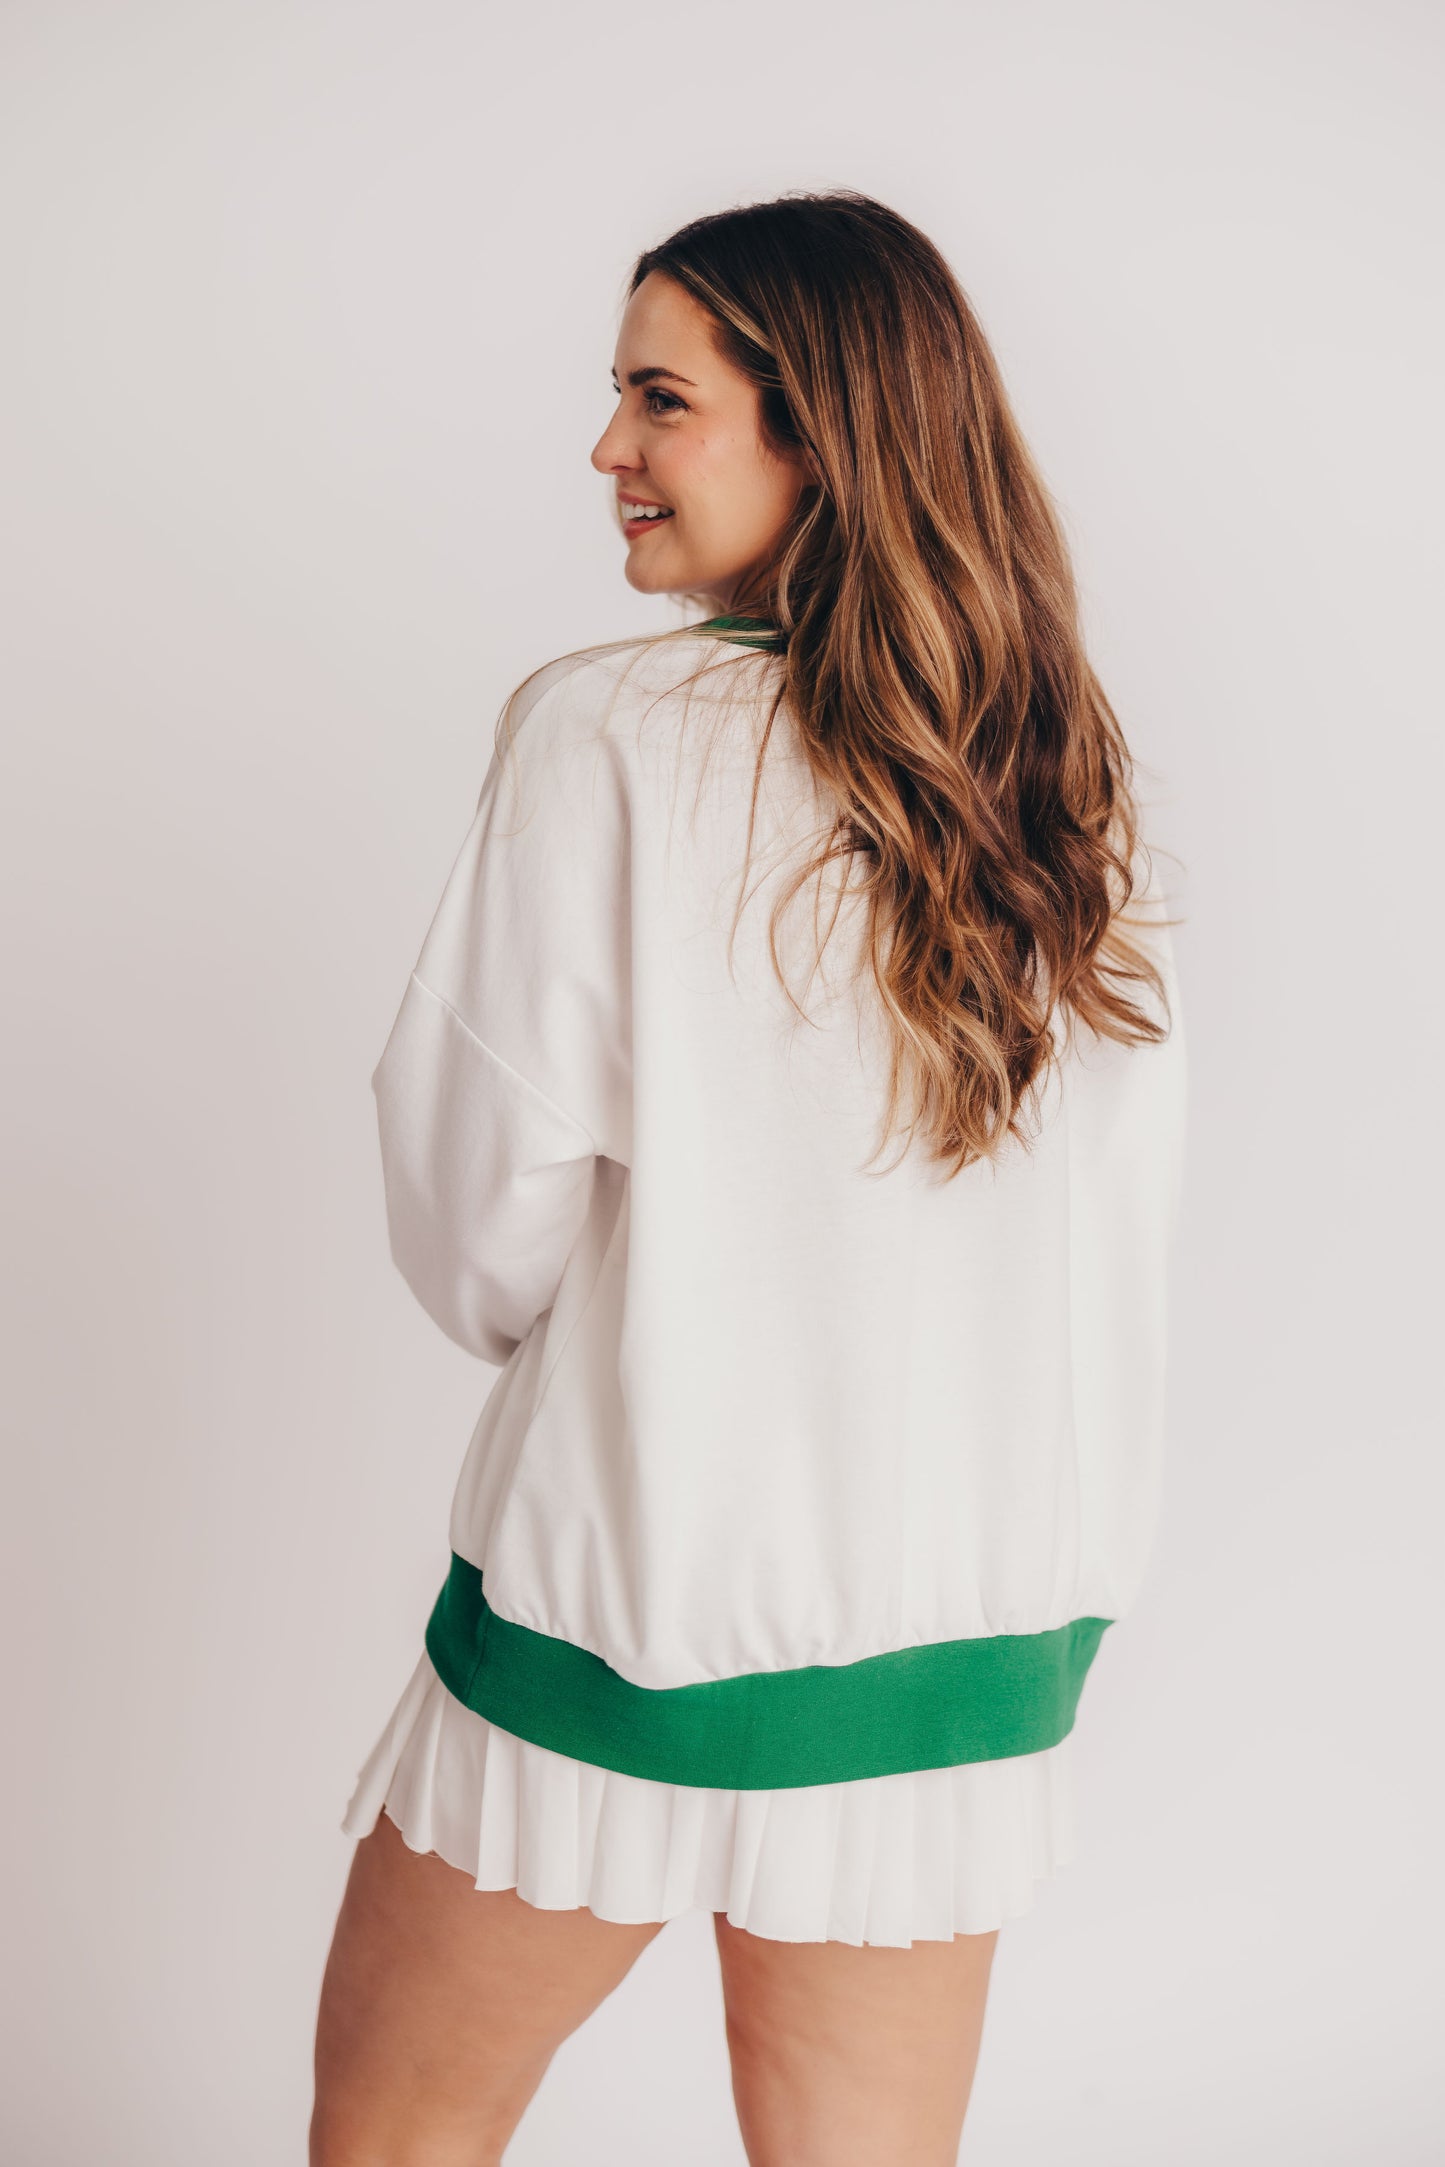 Racquet Club Pullover in White